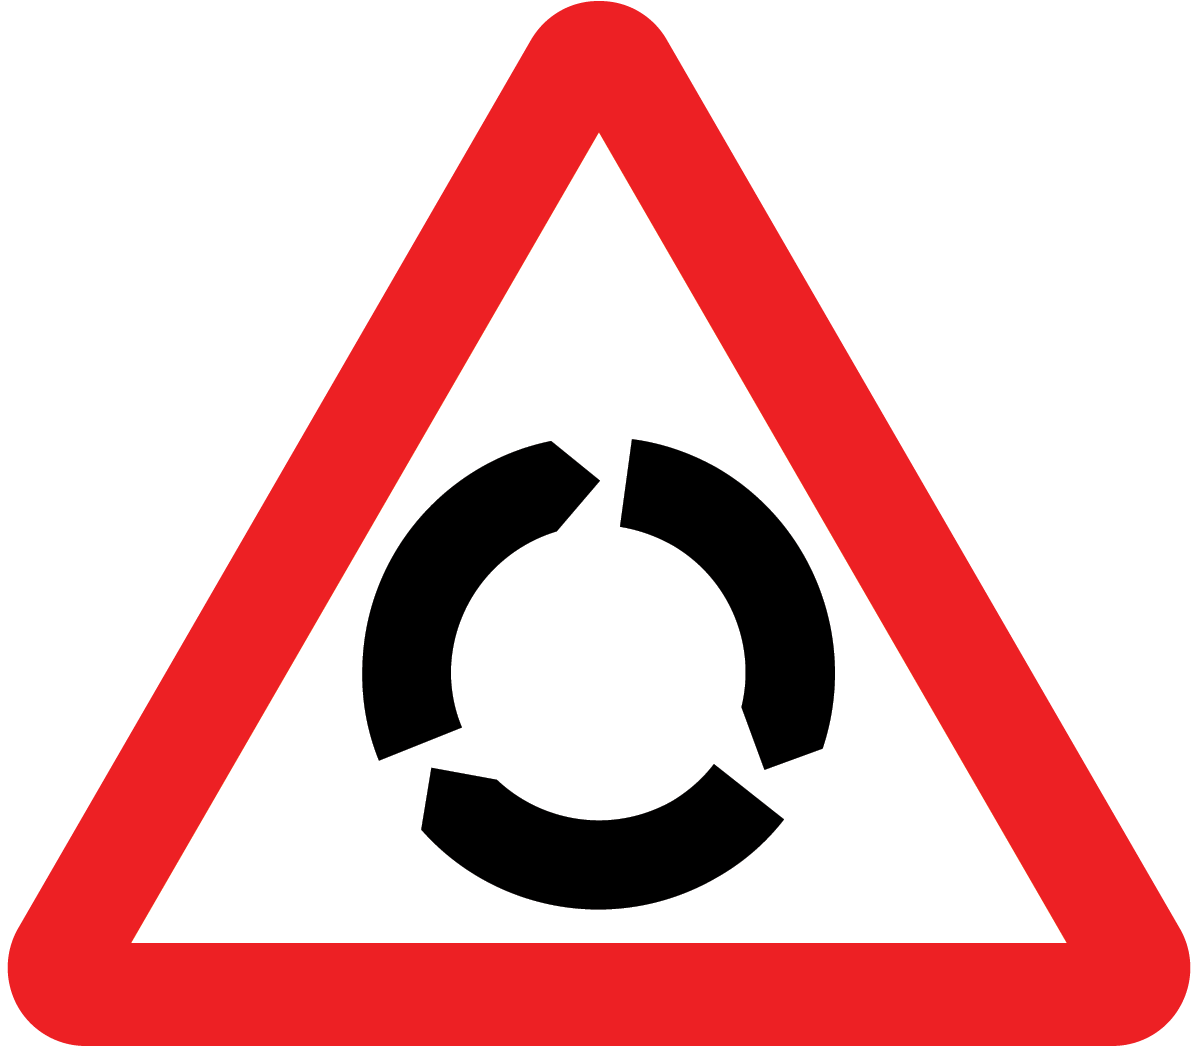 Roundabout sign - Theory Test